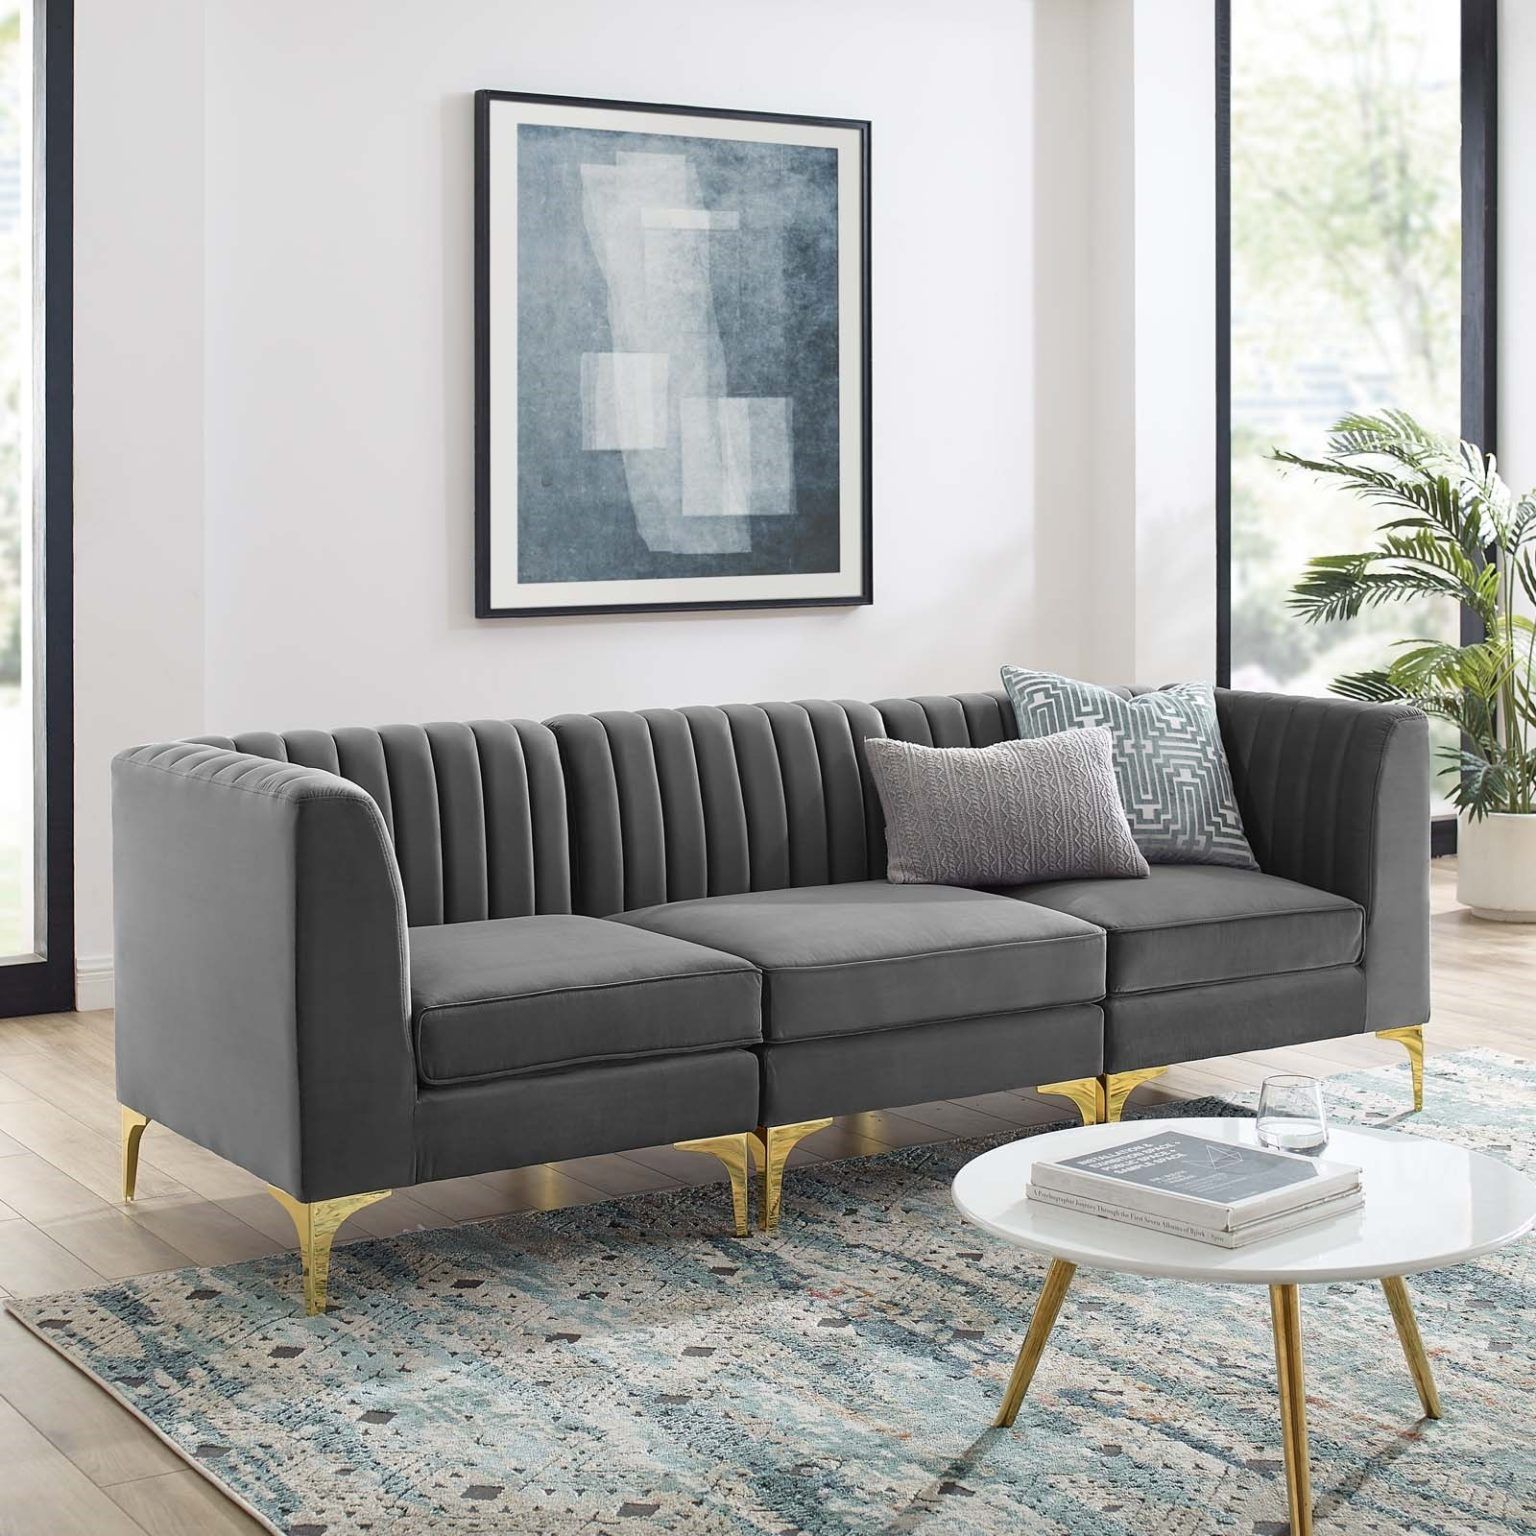 Triumph Channel Tufted Performance Velvet 3 Seater Sofa In Gray – Hyme With Regard To Modern Light Grey Loveseat Sofas (Gallery 15 of 20)